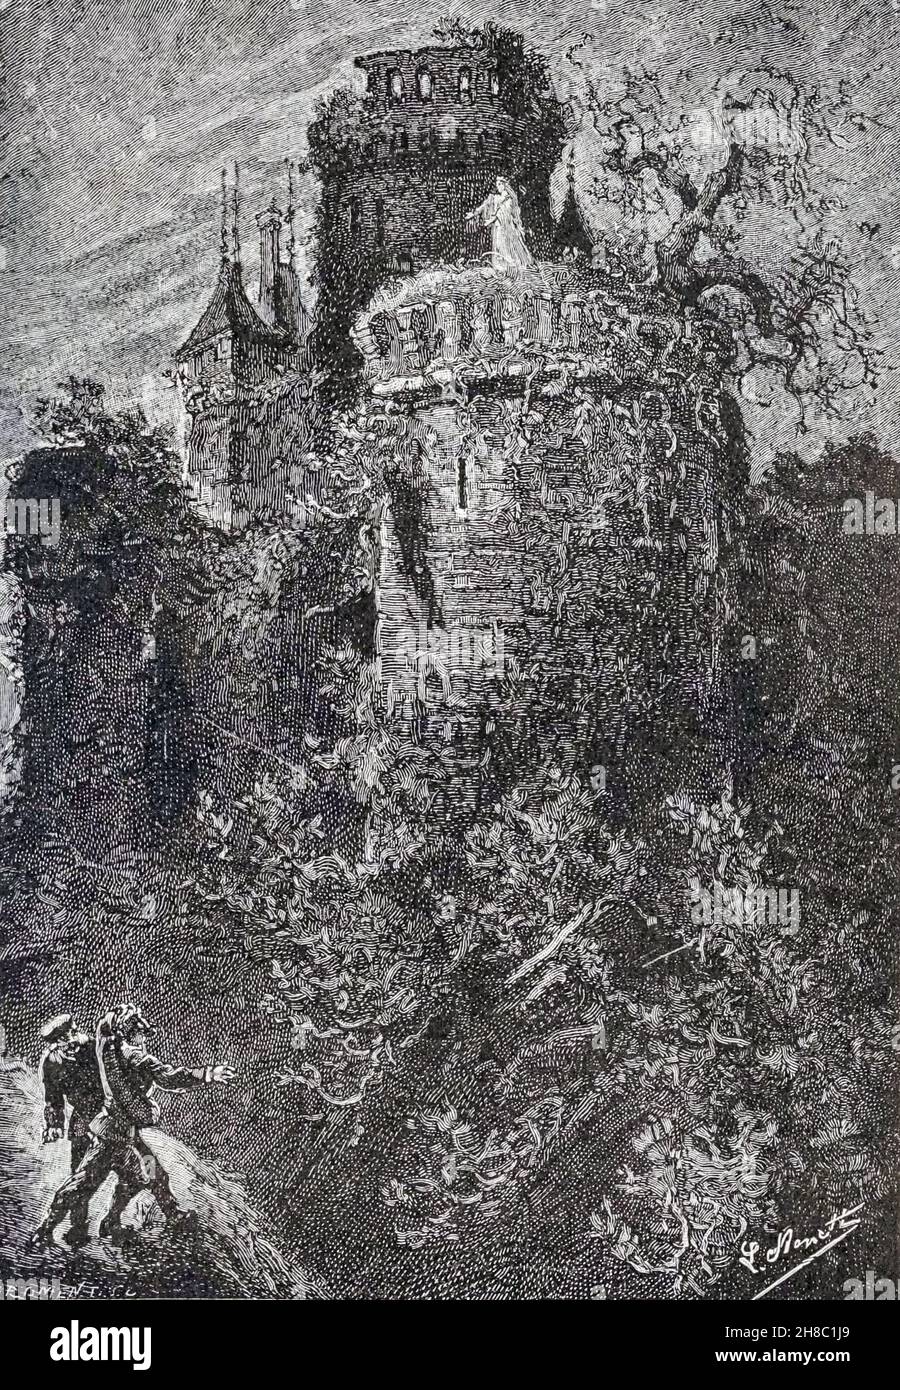 He would have rolled to the foot of the wall from ' The Carpathian Castle ' (or The castle of the Carpathians) by Jules, Verne, 1828-1905. May have been the inspiration for Dracula, Published in New York, by Merriam in 1894 In the village of Werst in the Carpathian mountains of Transylvania, some mysterious things are occurring and the villagers believe that Chort (the devil) occupies the castle. A visitor to the region, Count Franz de Telek, is intrigued by the stories and decides to go to the castle and investigate. He finds that the owner of the castle is Baron Rodolphe de Gortz, with whom Stock Photo